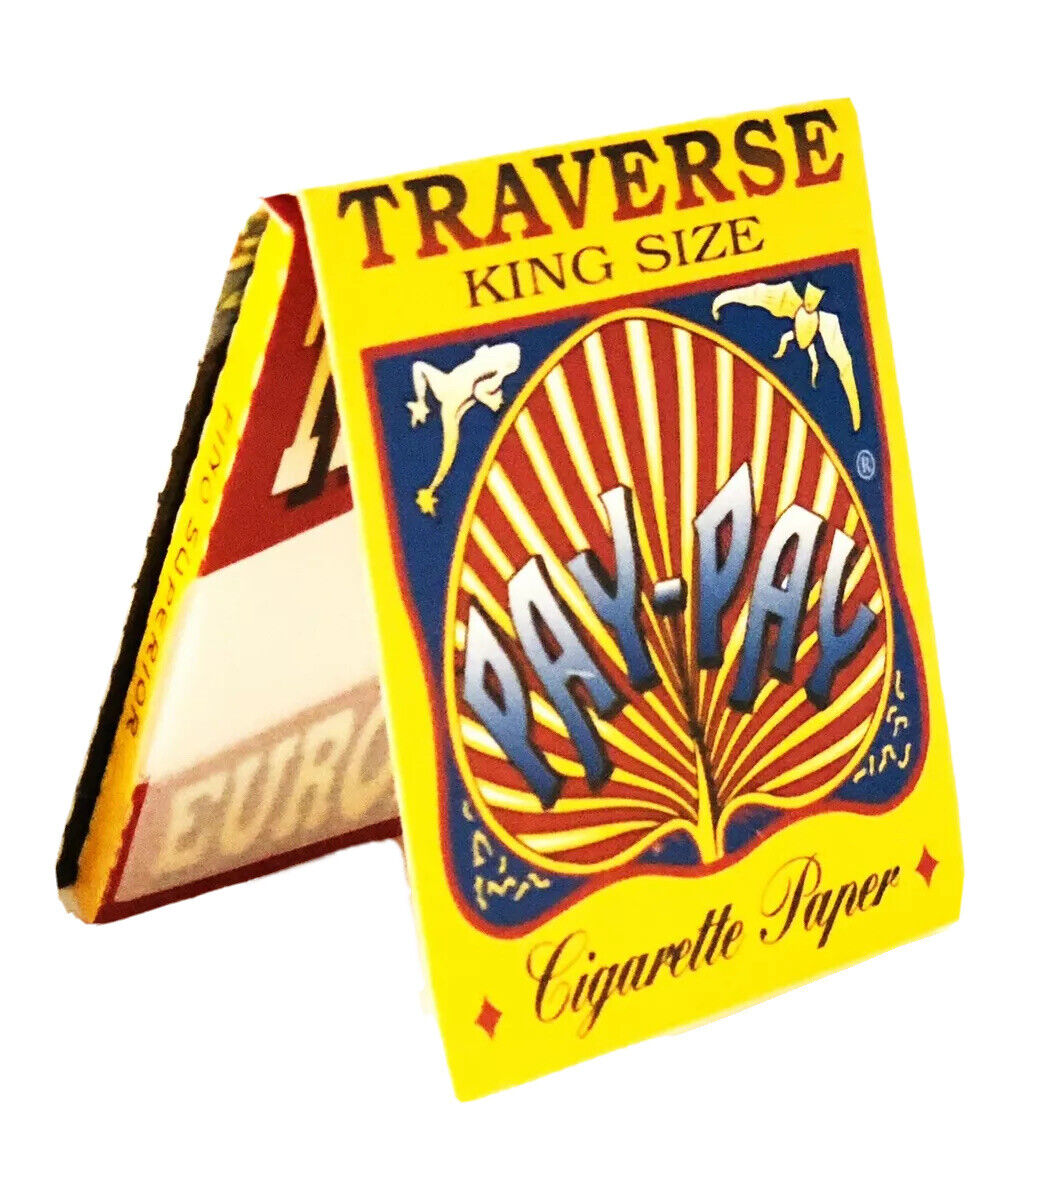 Pay Pay 25 Booklets Traverse King Size Cigarette Rolling Papers made in Spain